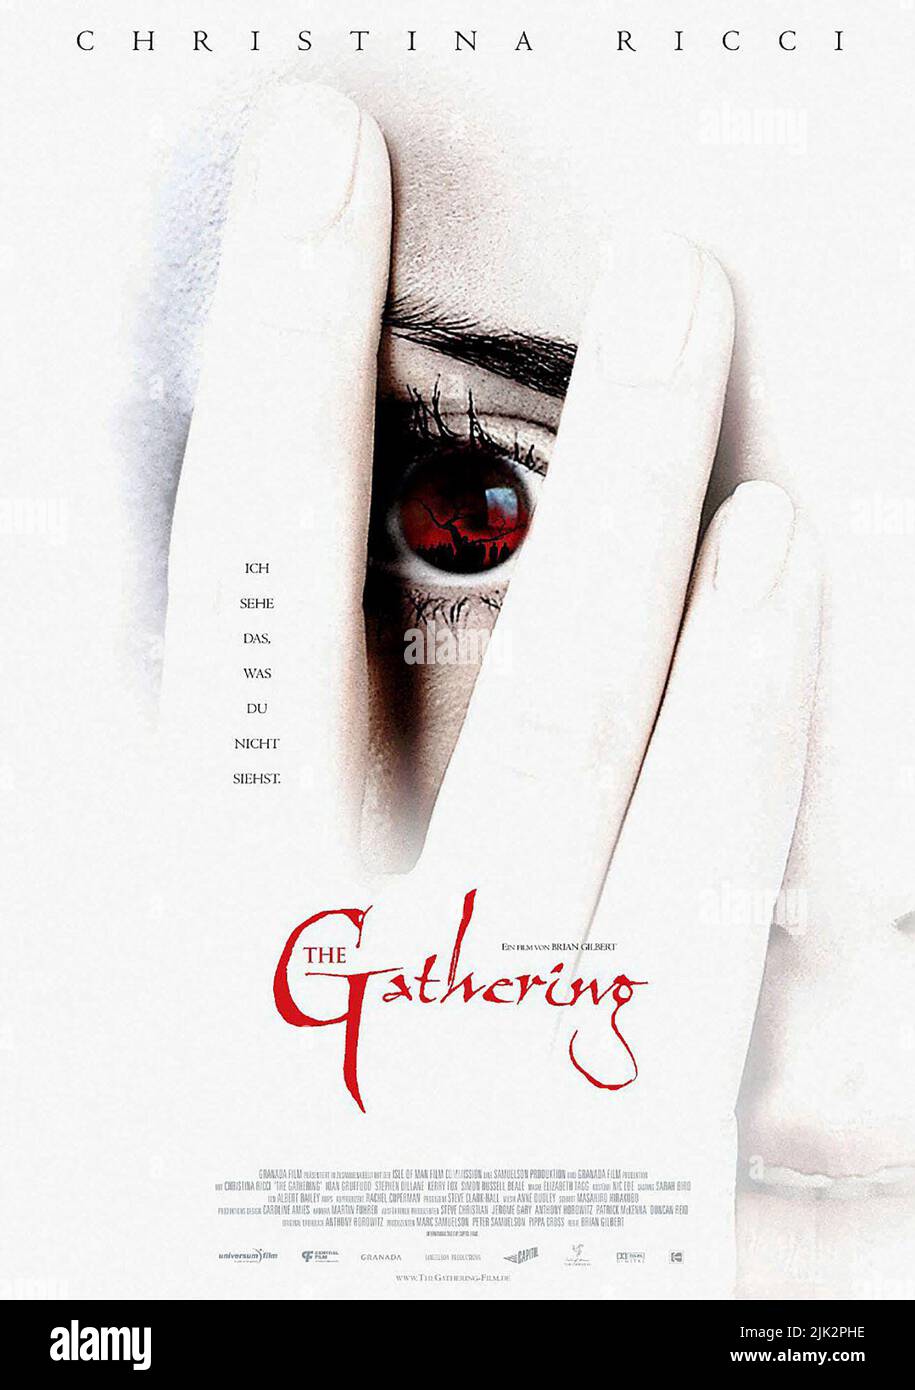 FILM POSTER, THE GATHERING, 2002, Stock Photo